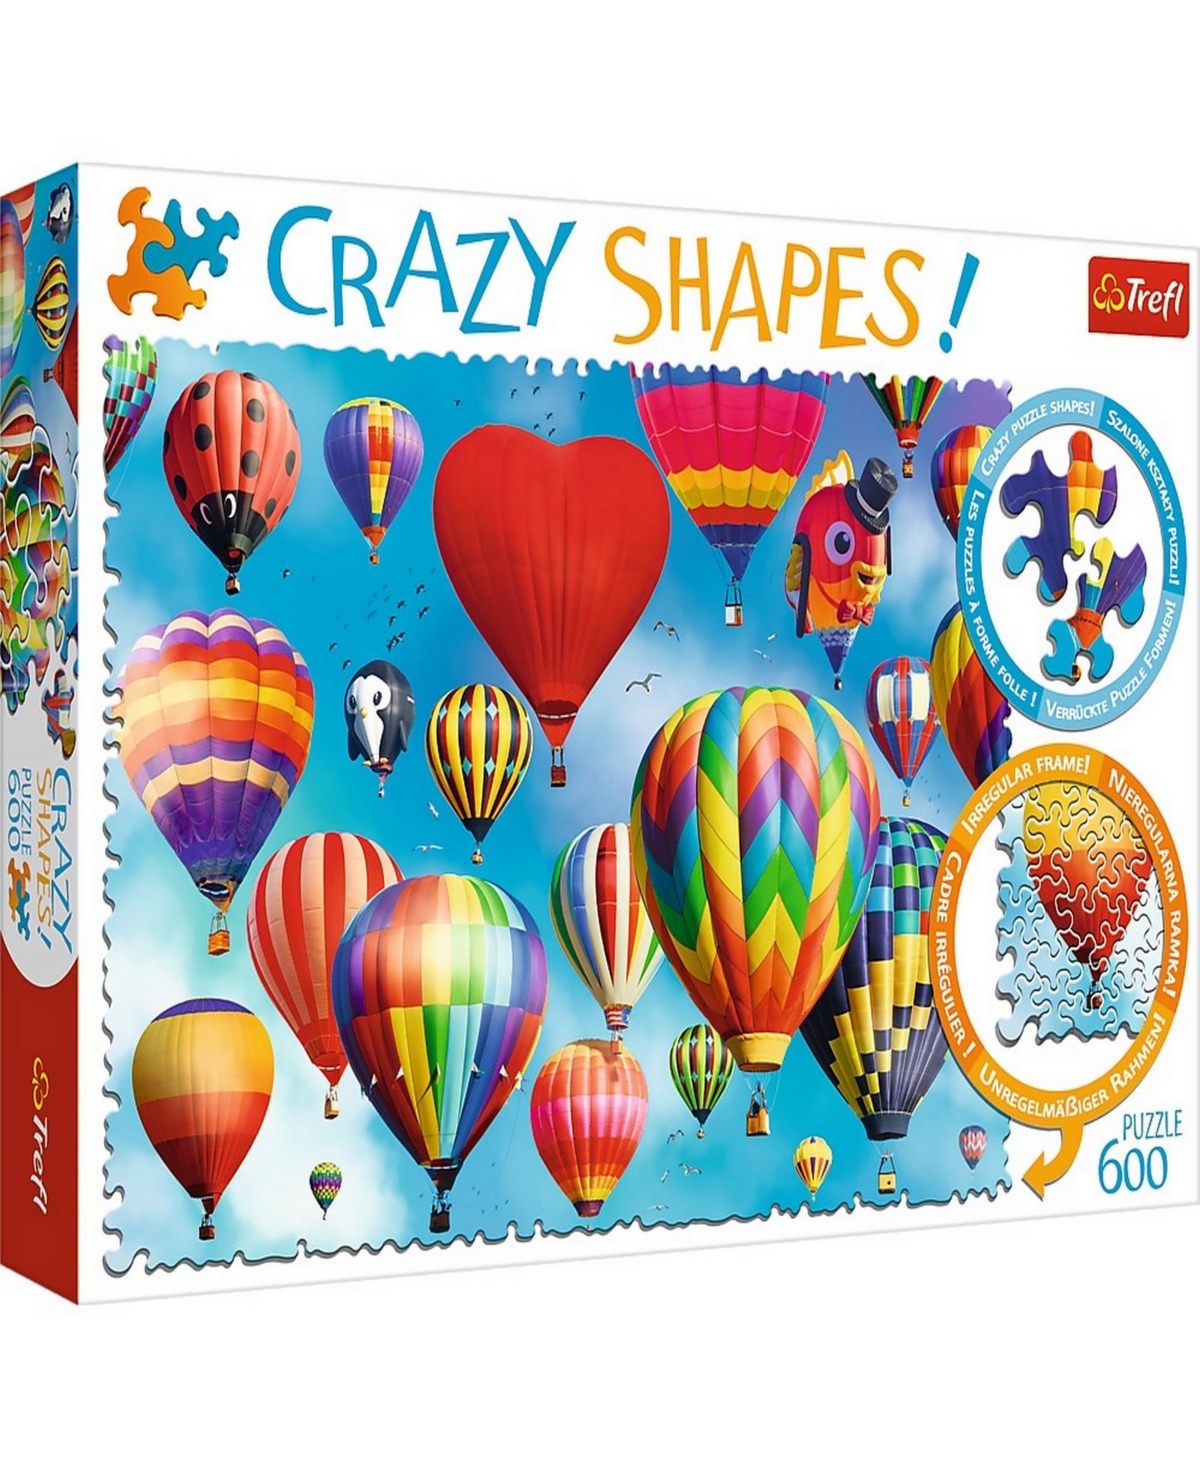 Trefl Crazy Shape Jigsaw Puzzle Colorful Balloons, 600 Pieces In Multicolor